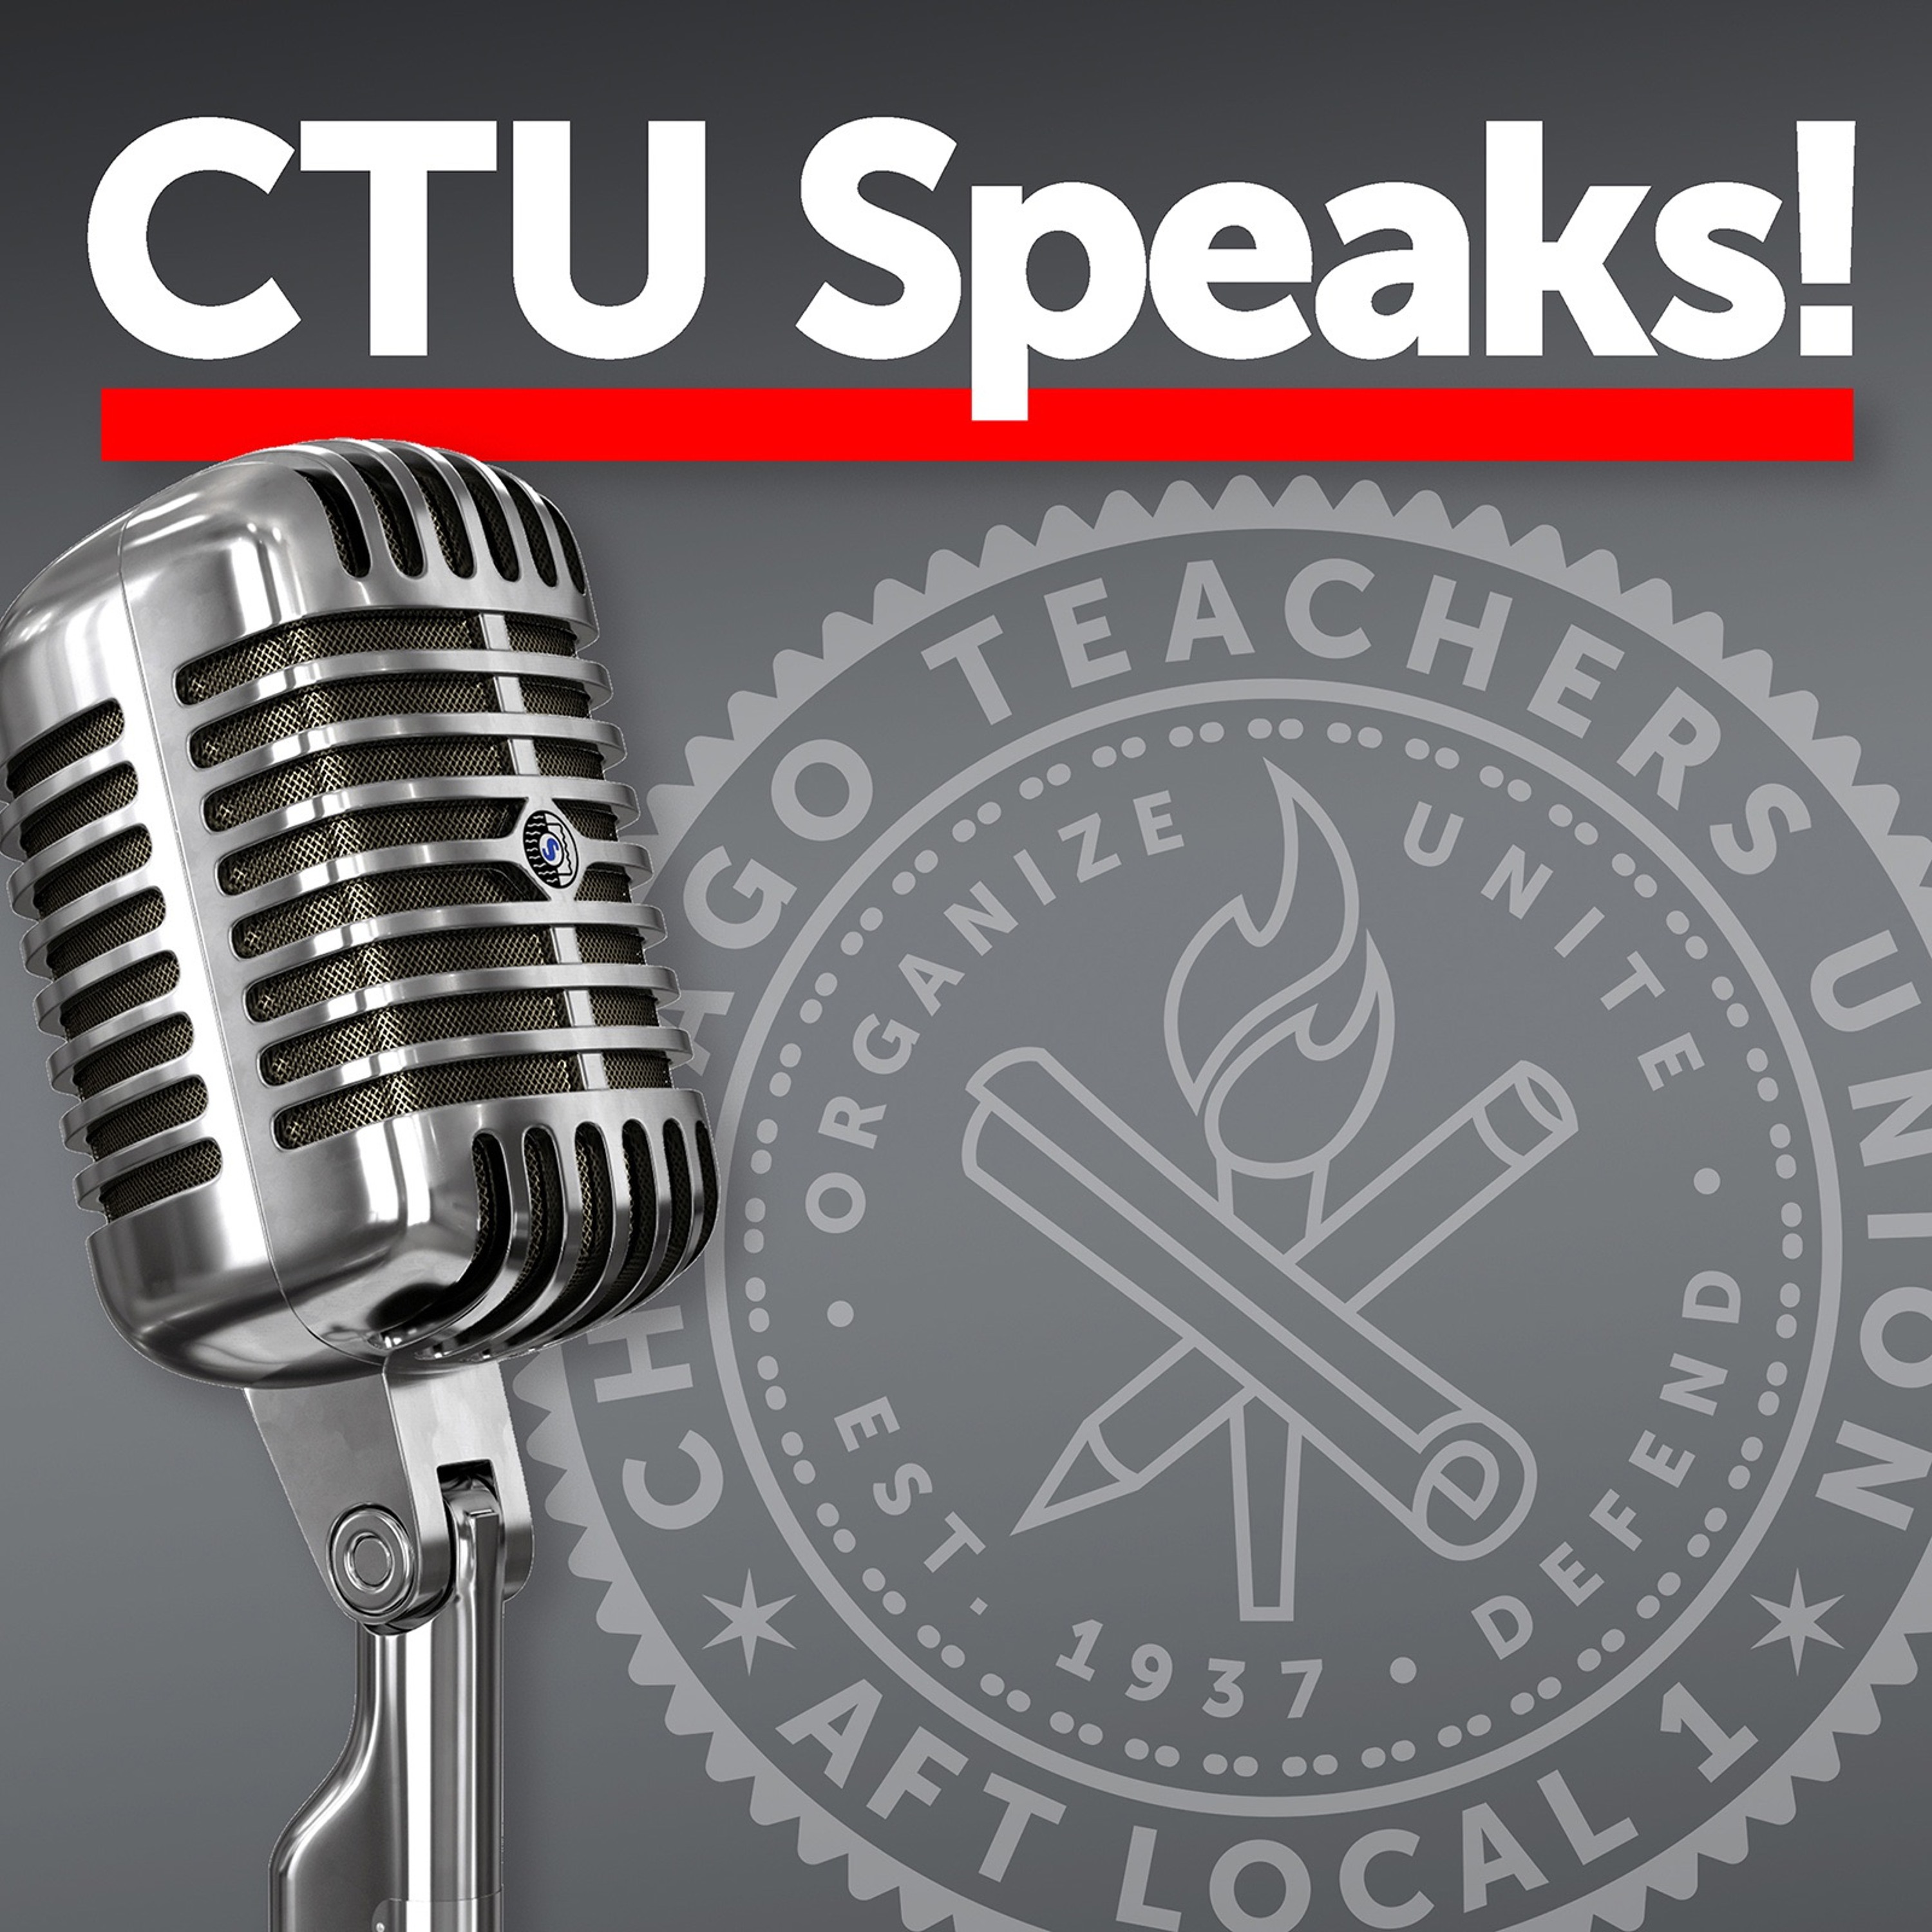 00: CTU Speaks! a new podcast by the Chicago Teachers Union